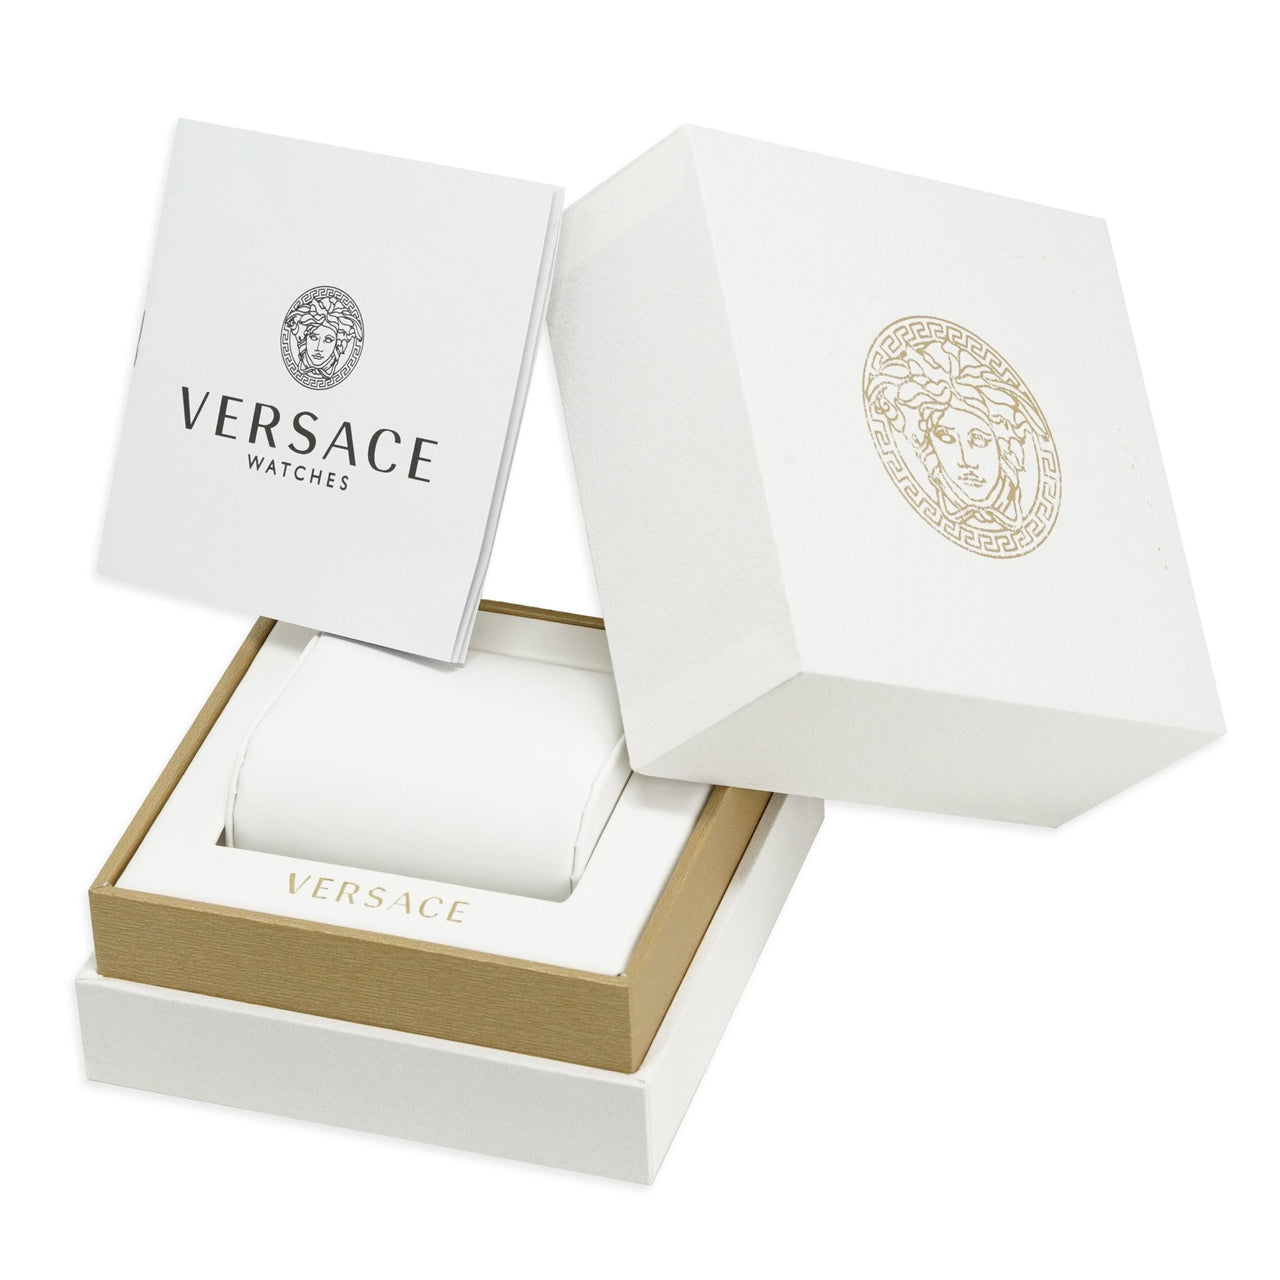 Versace Watch V-Circle 42mm Red VE5A01421 - Watches & Crystals